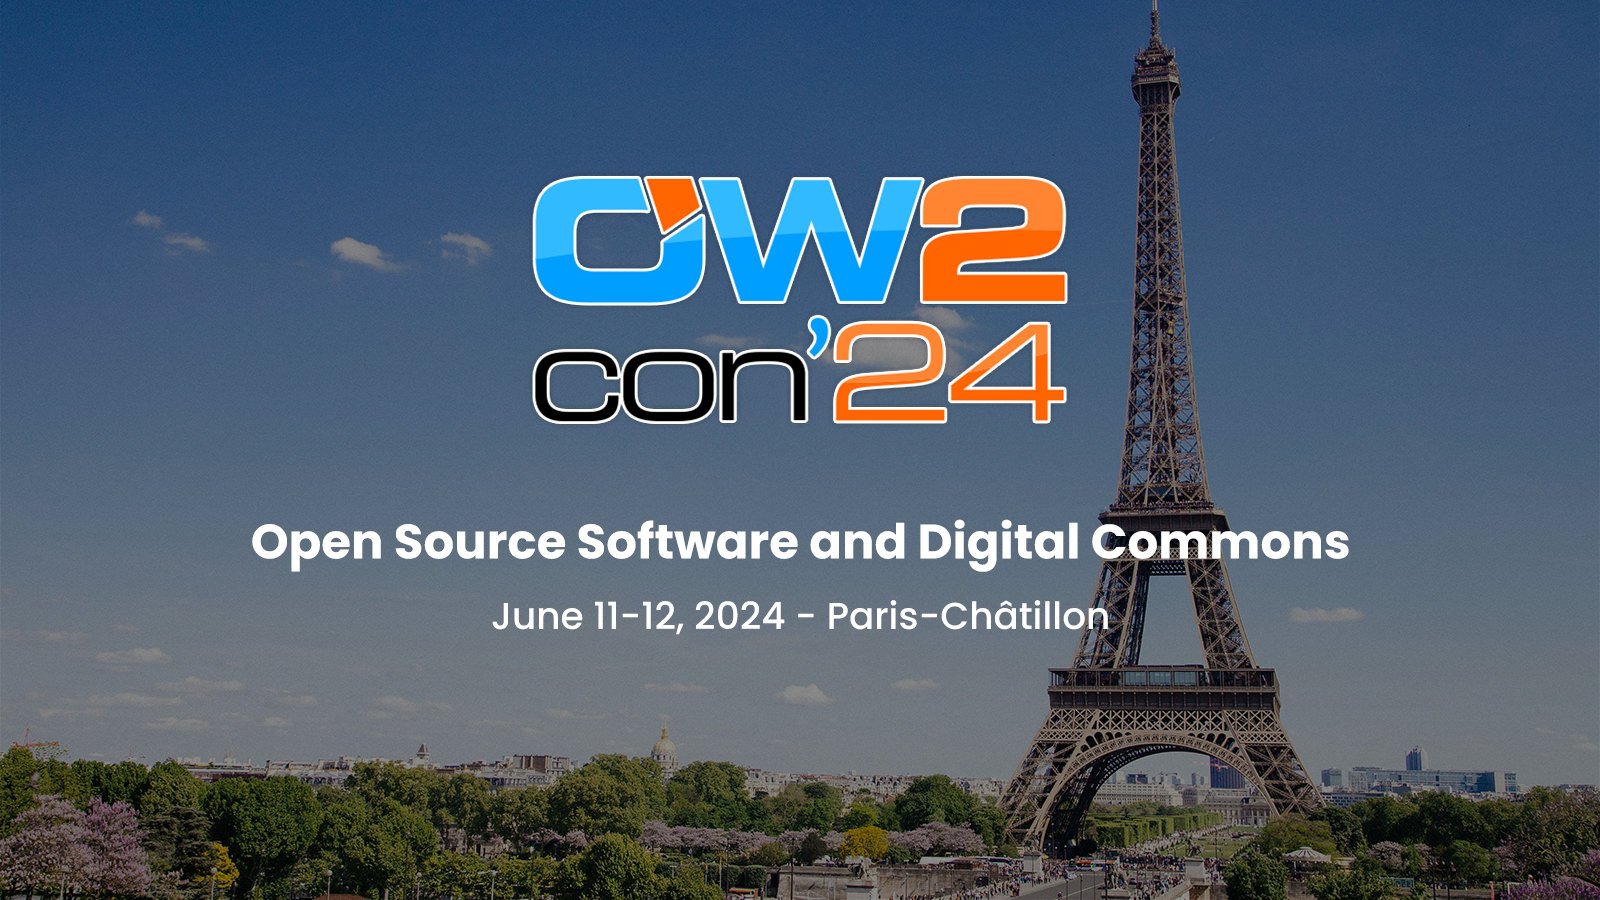 Open Source Community Annual Conference 2024